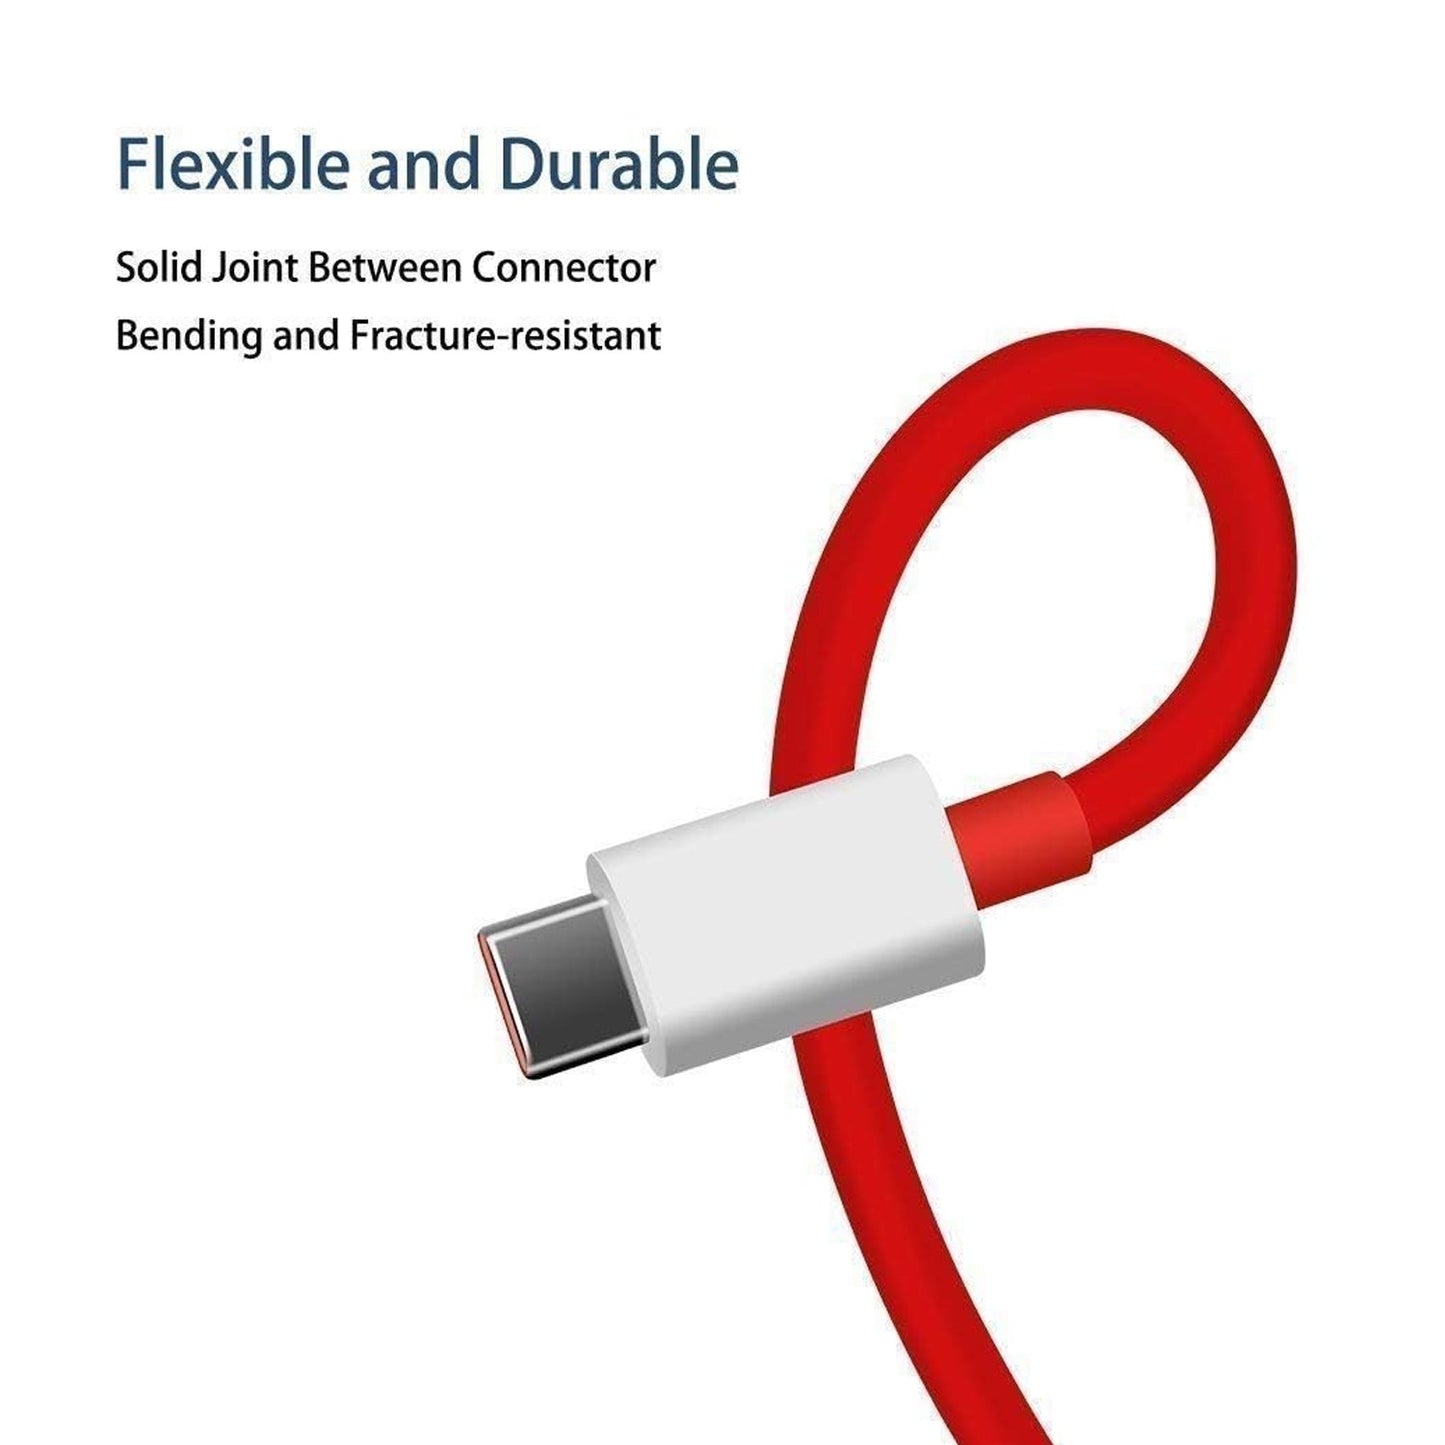 6036 Unique Type C Dash Charging USB Data Cable | Fast Charging Cable | Data Transfer Cable For All C Type Mobile Use 1 Meter ( RED ) DeoDap